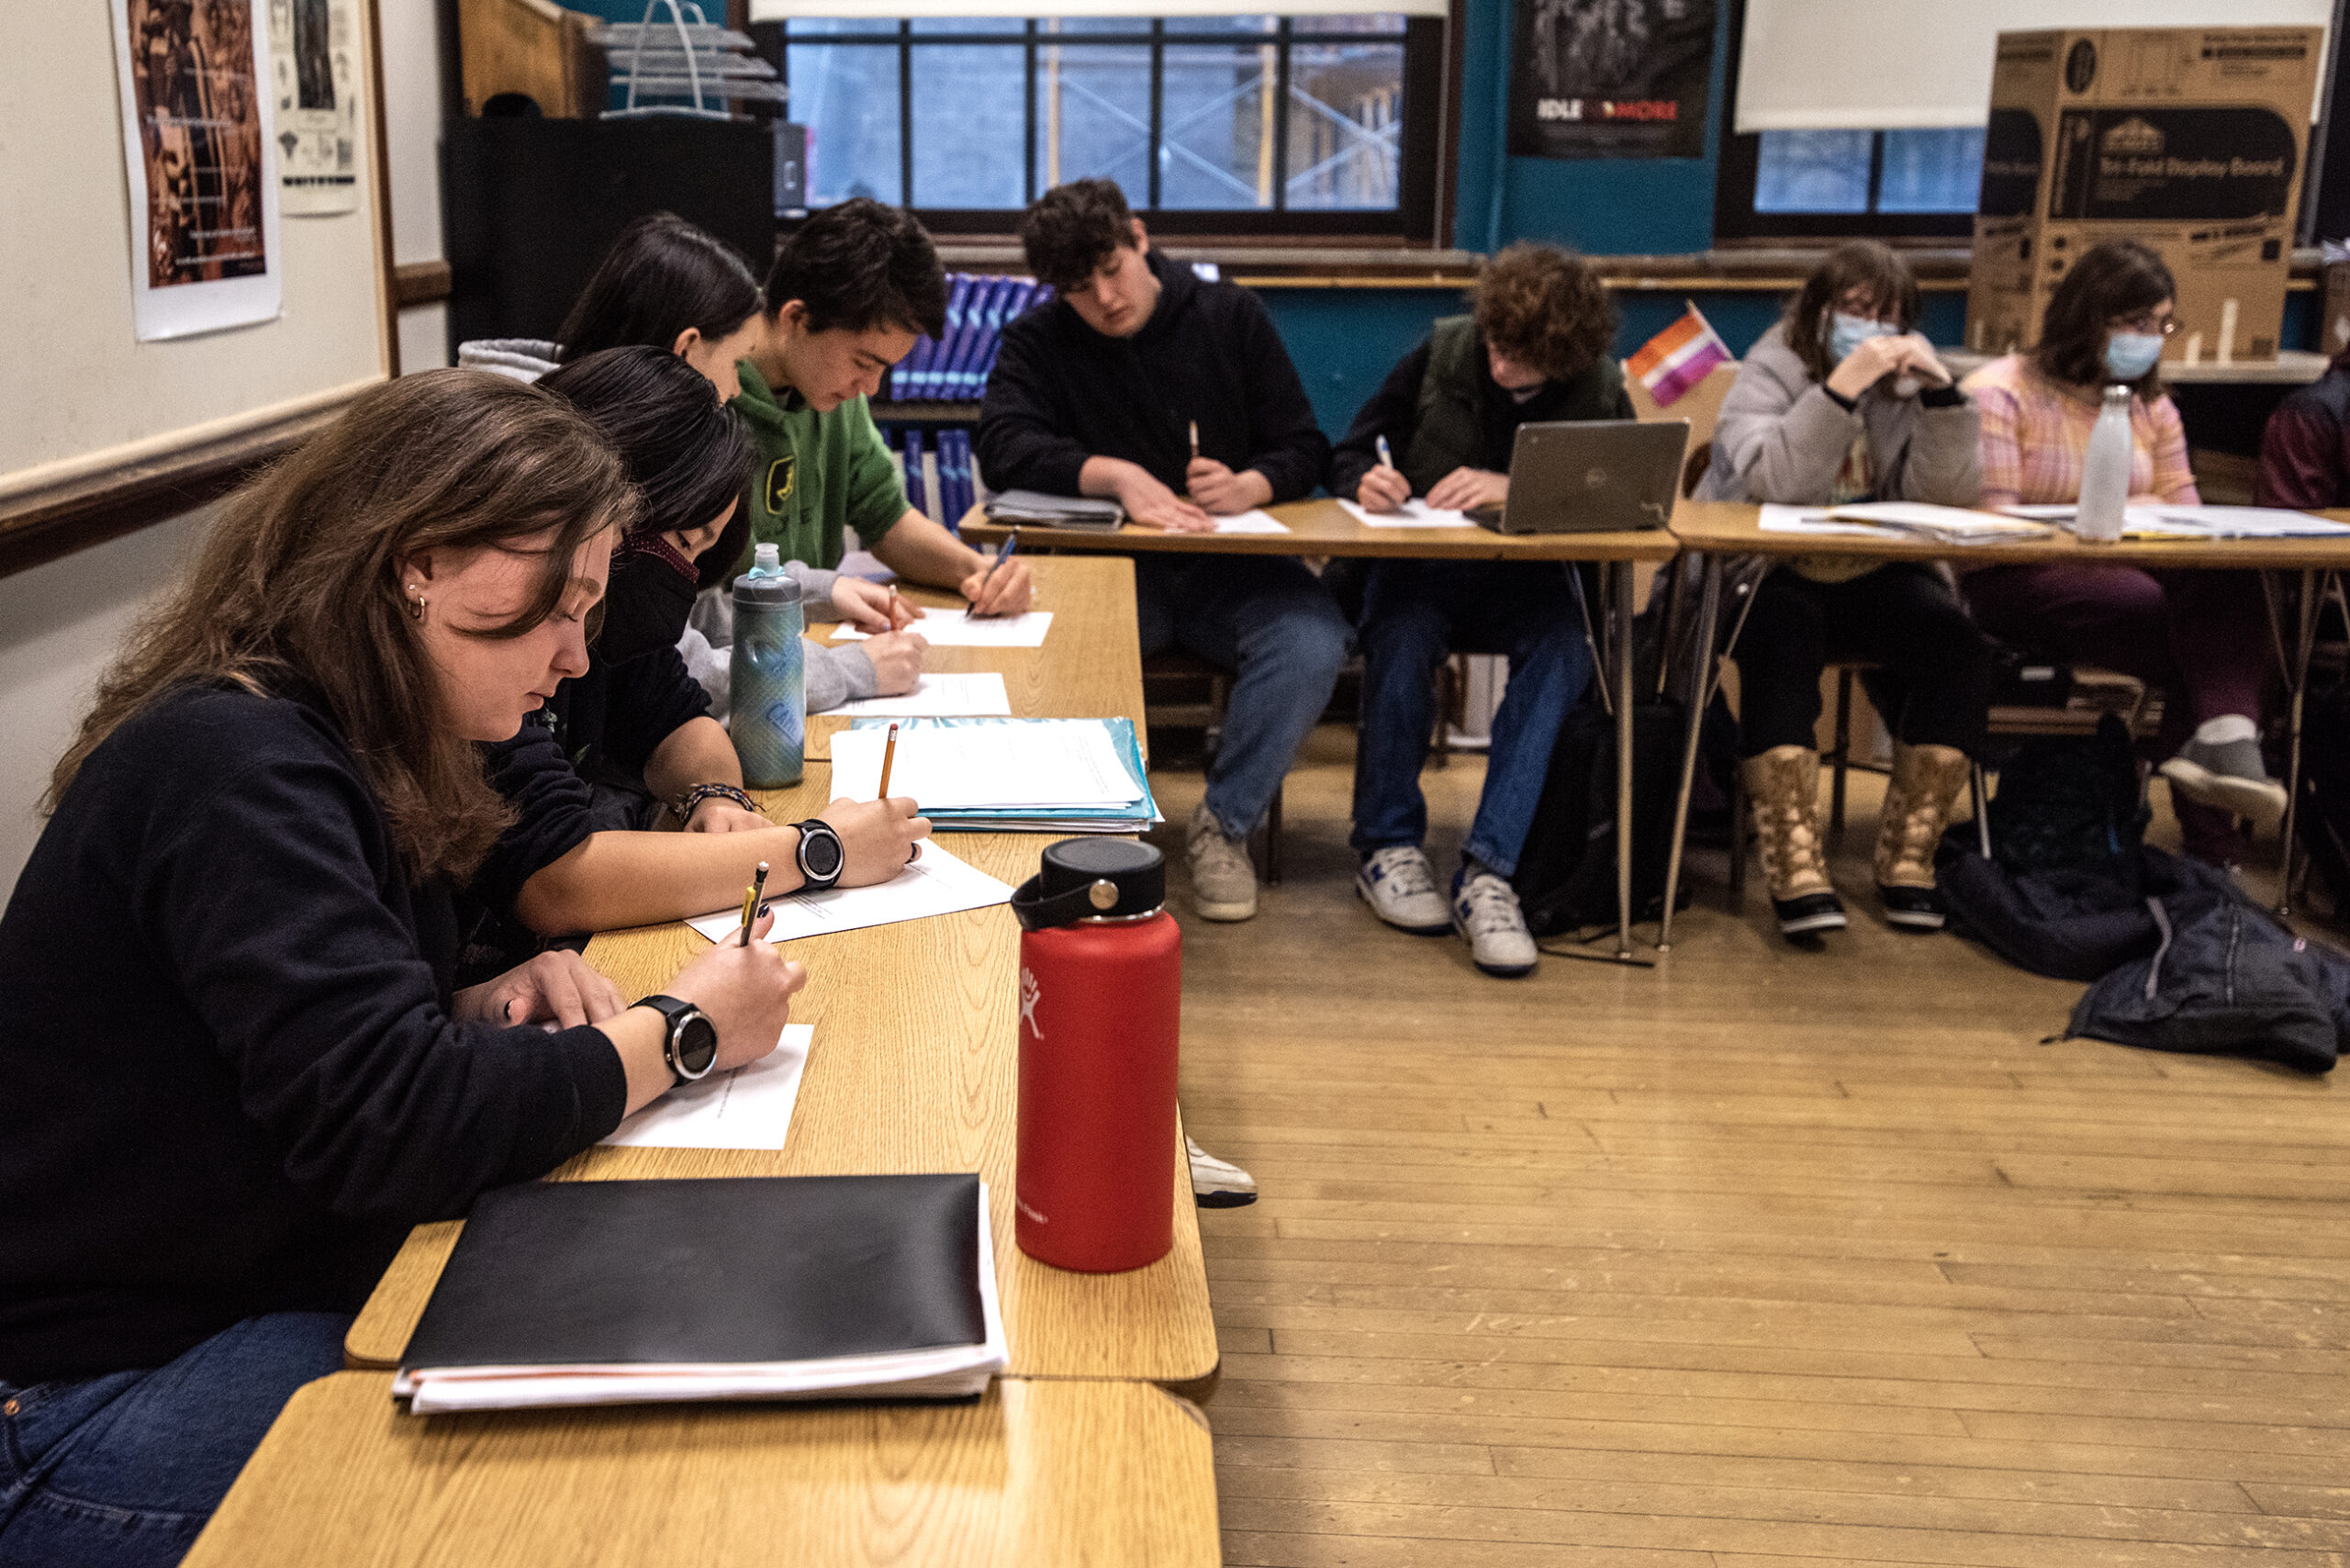 Students sit in desks during a discussion.